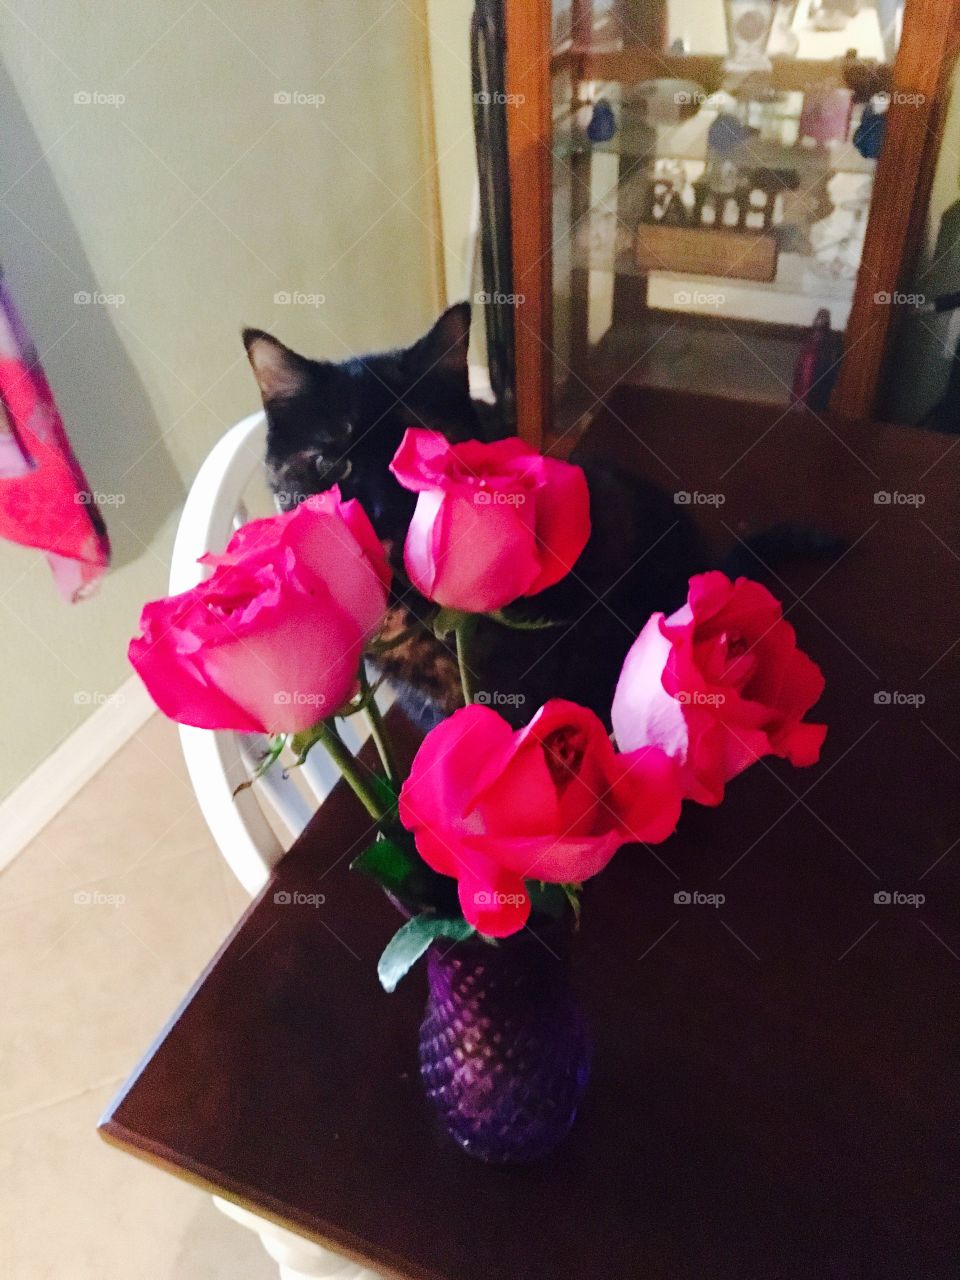 No, Kitty, the flowers are not for you!